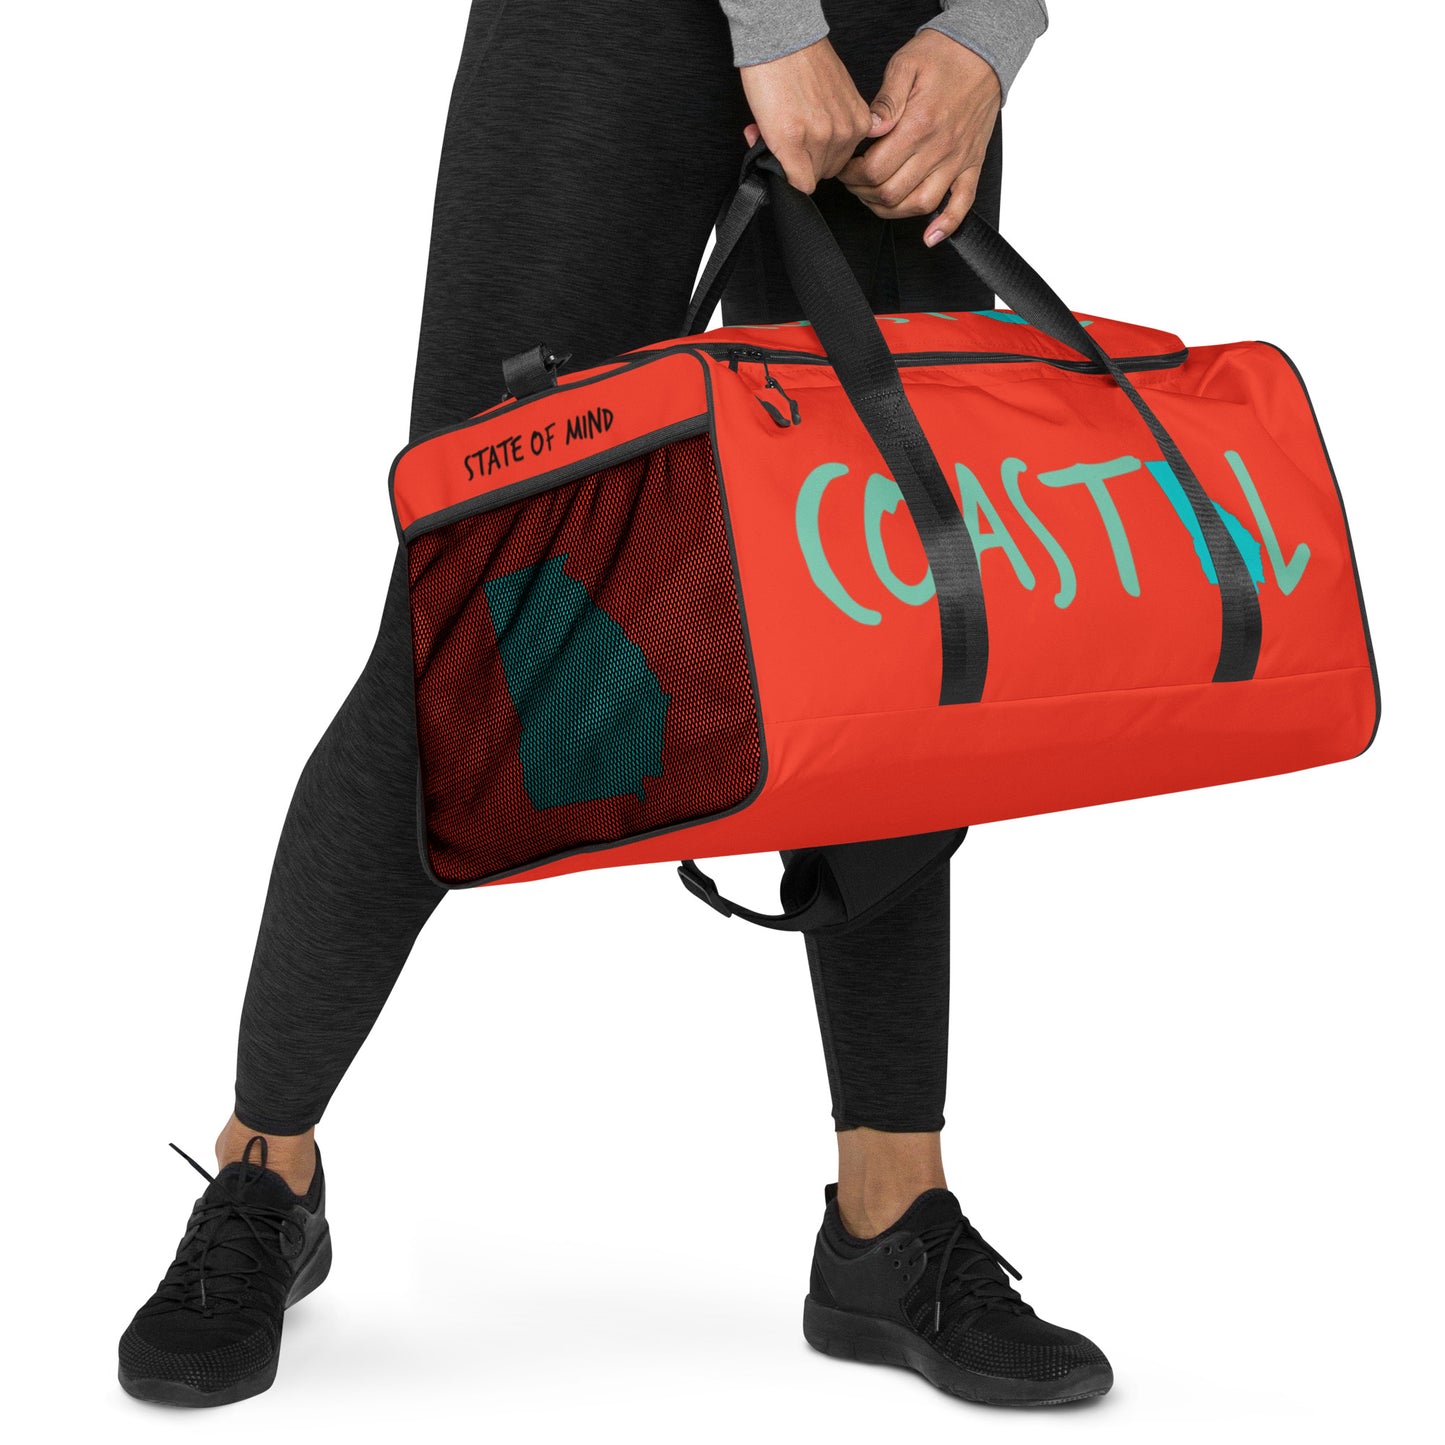 Coastal Georgia™ Carry Everything-in-Style Duffle